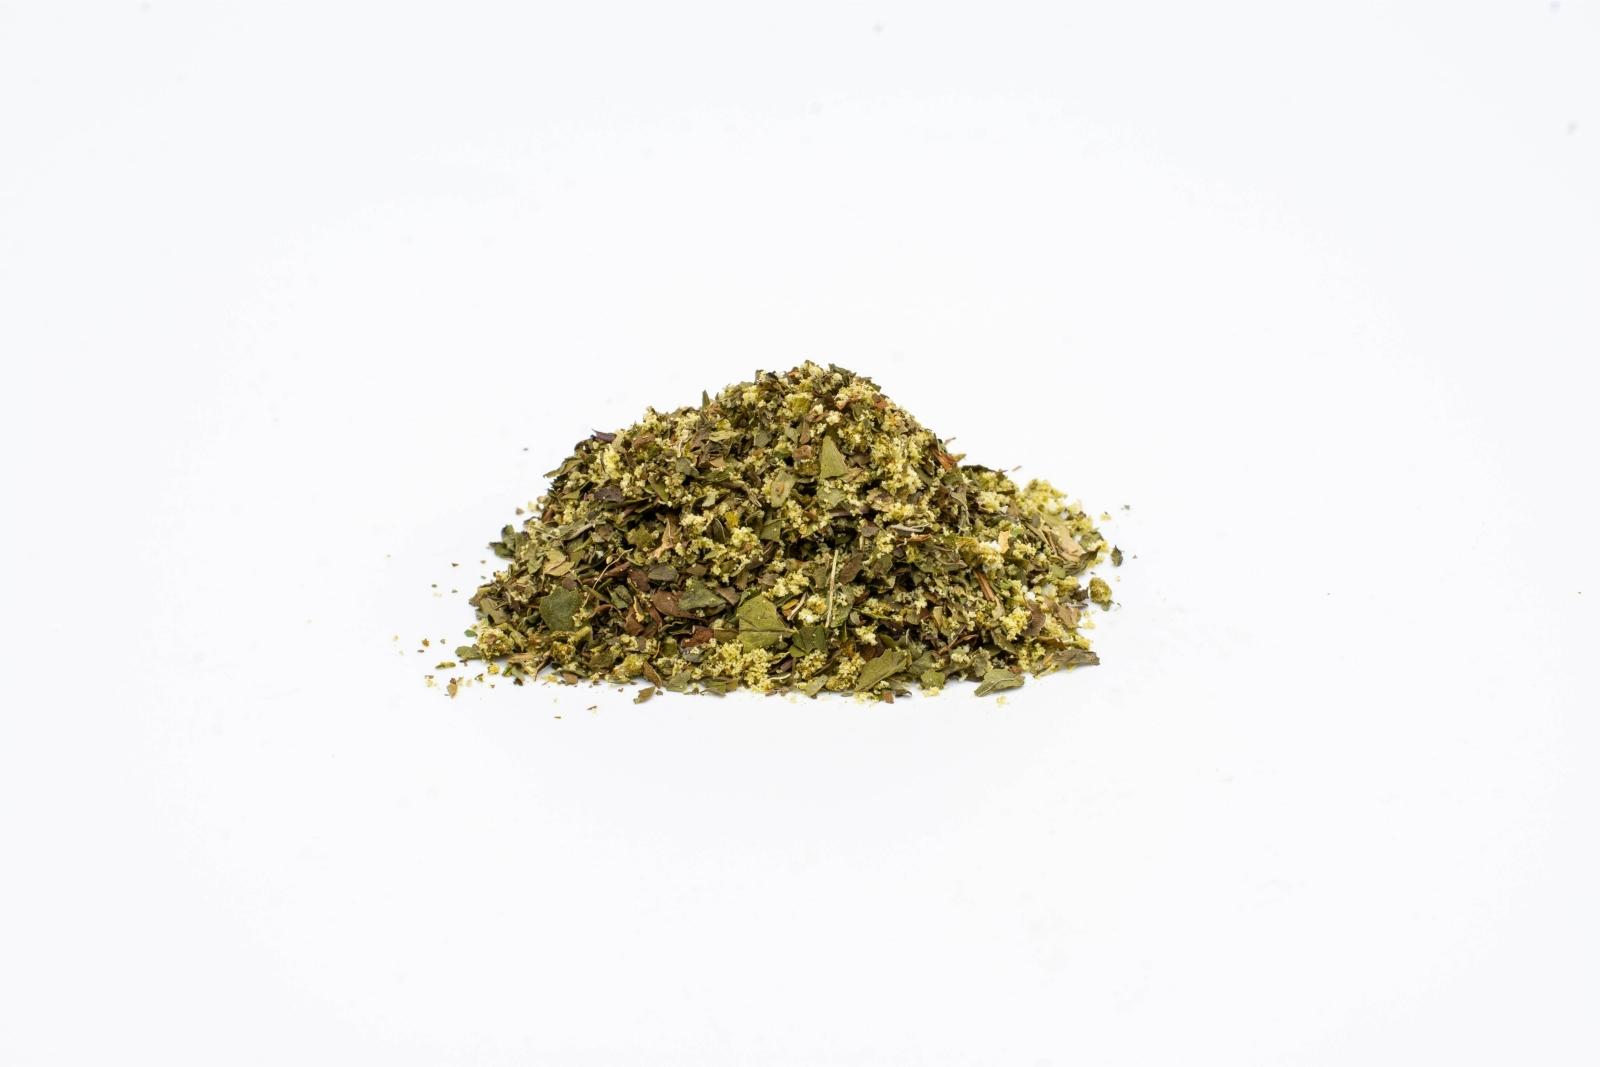 A pile of loose Mellow Mint tea by The Brothers Apothecary on a white background